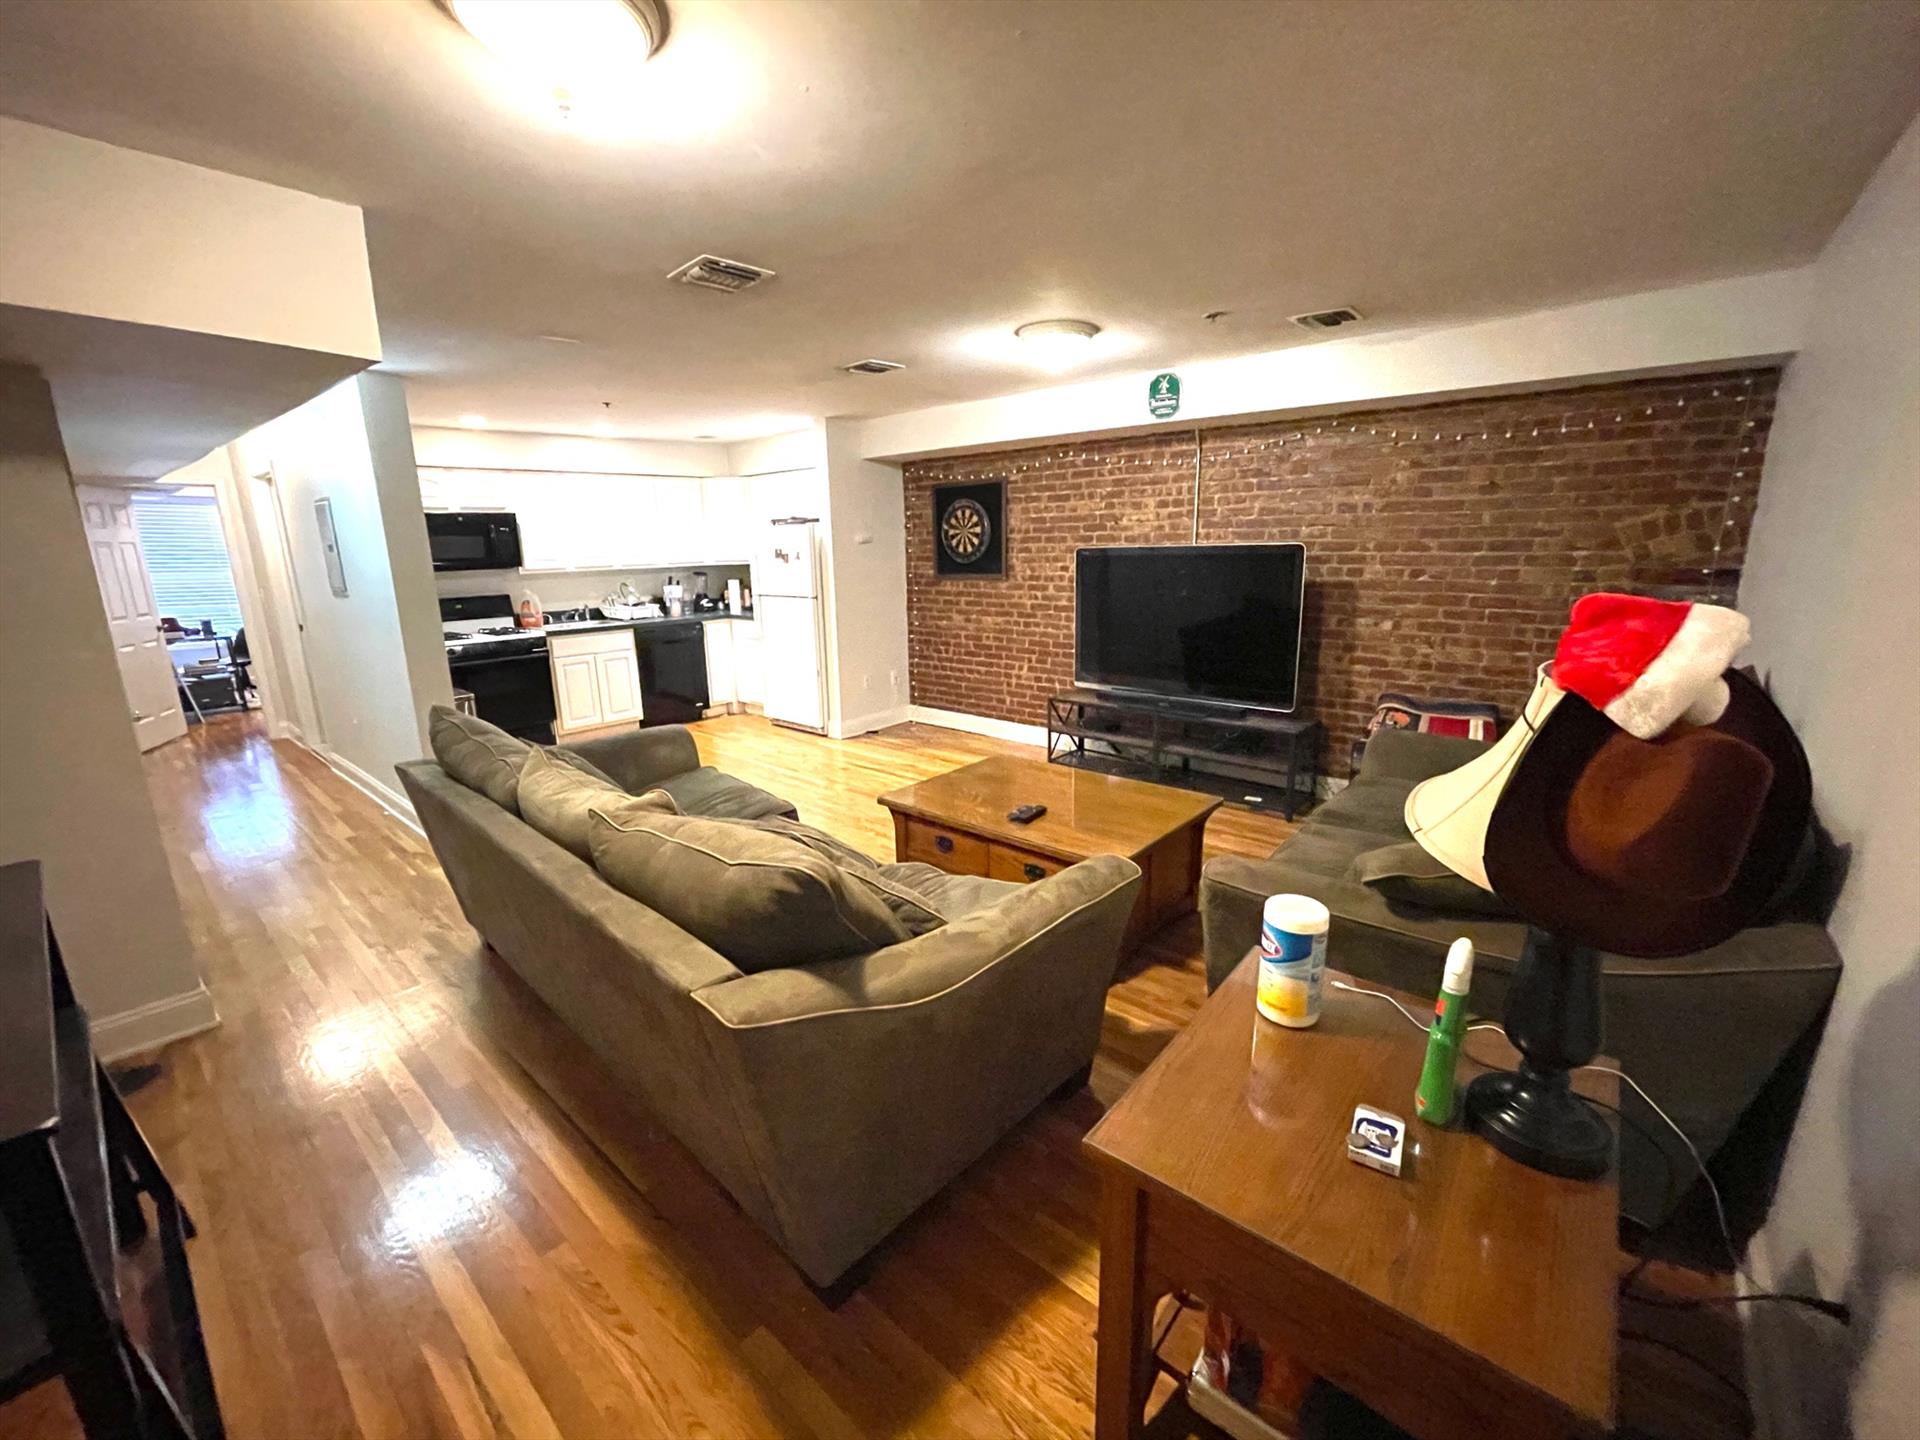 Amazing & spacious 3 bed 2 bath unit located in the heart of Hoboken. Unit features hardwood floors, washer/dryer in unit & central air! Available 5/1. One month broker fee. Don't miss this fantastic opportunity.